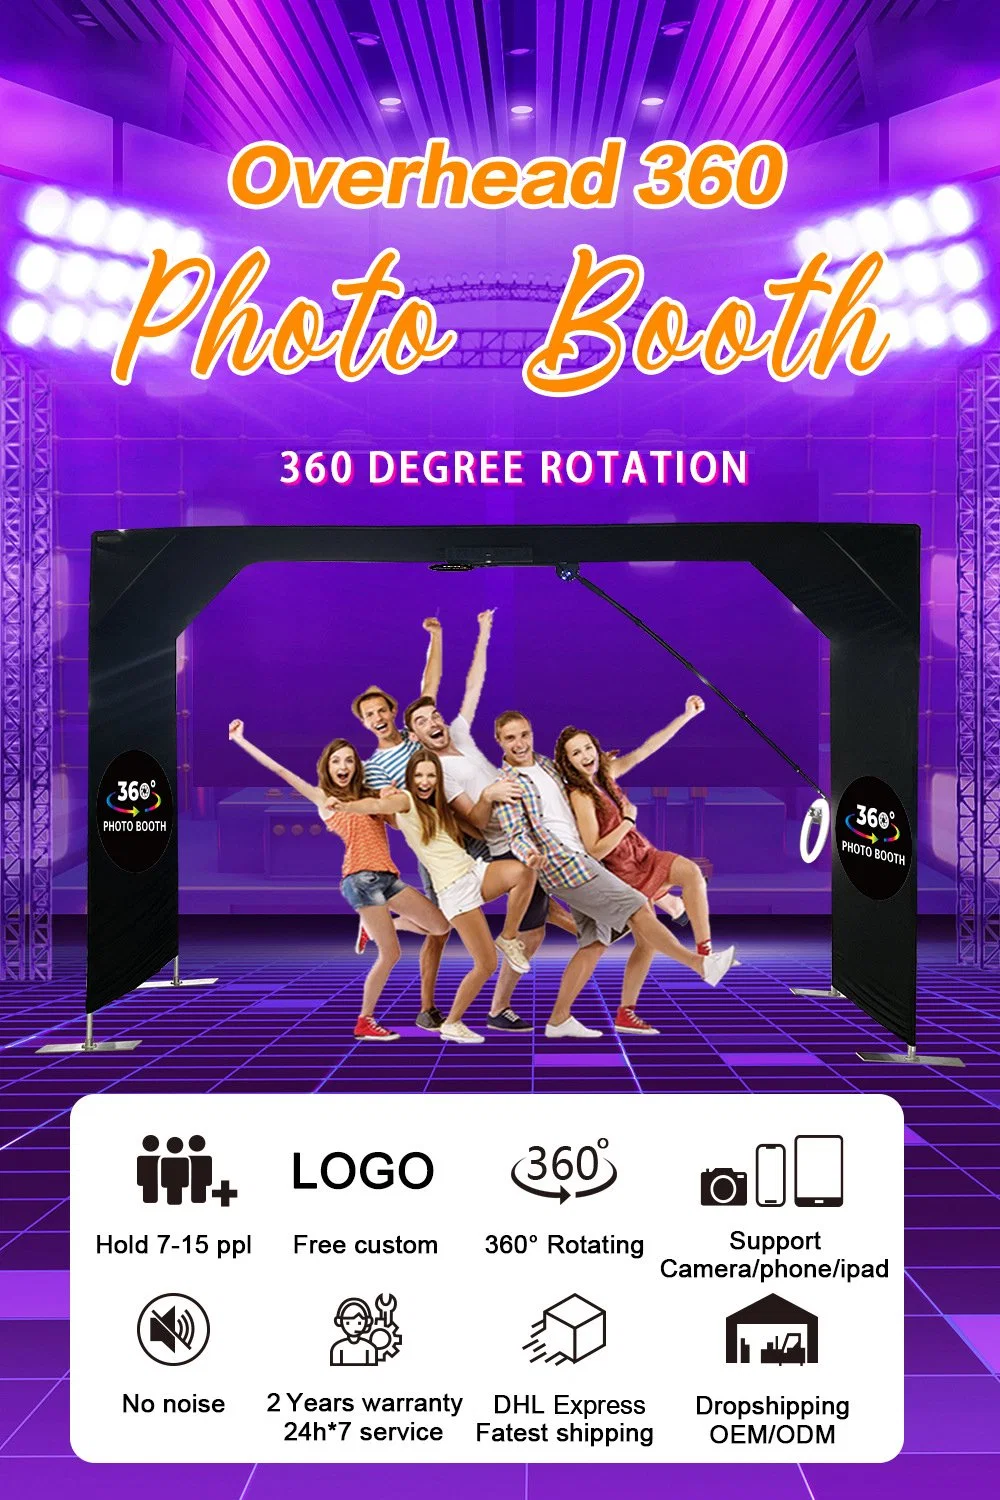 Overhead 360 Photo Booth Powered by Battery Work with Smart Phone